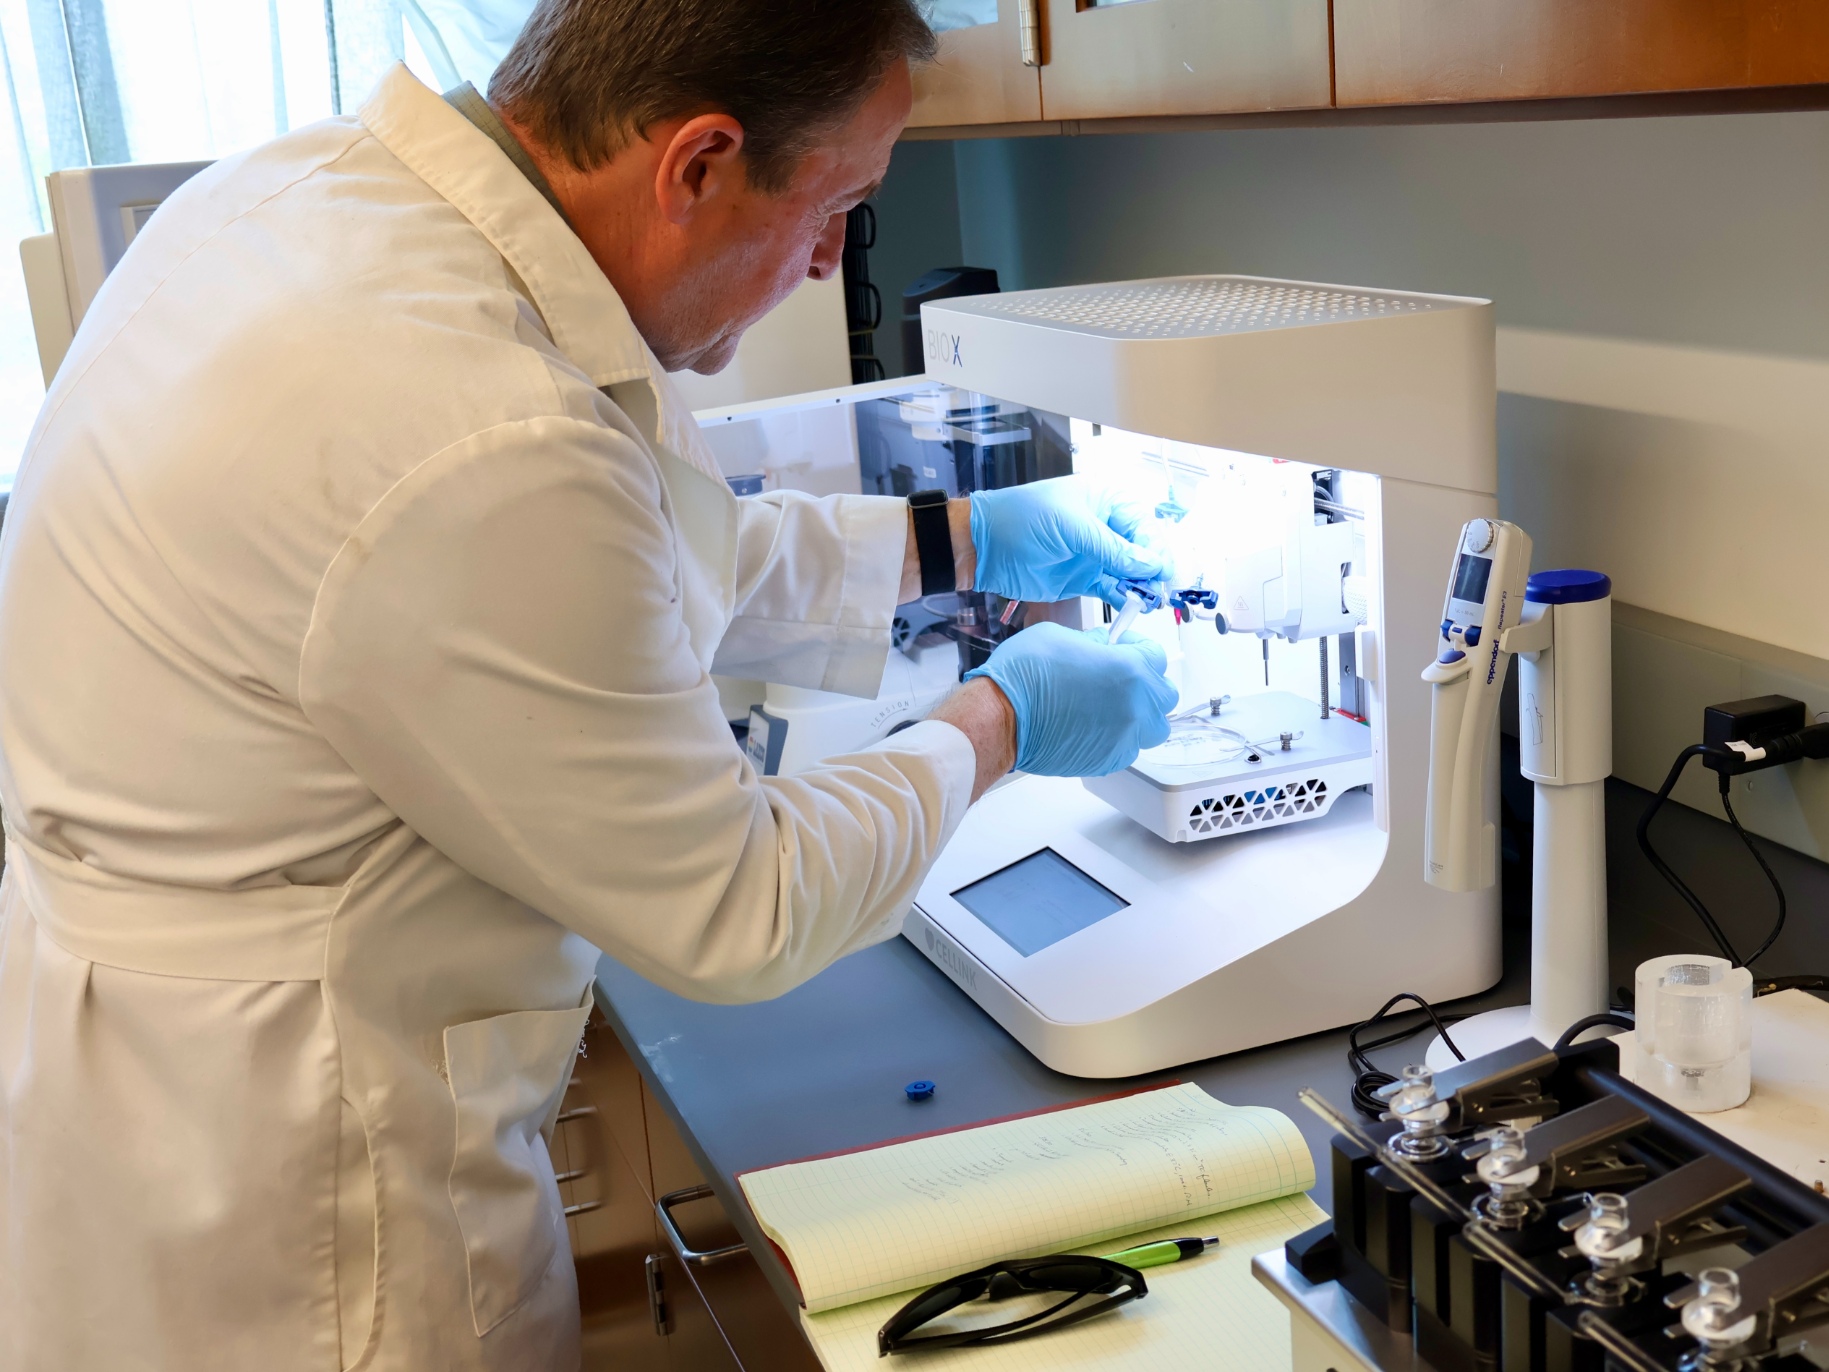 David Dyer uses a 3D tissue printer to study cells in a tissue sample